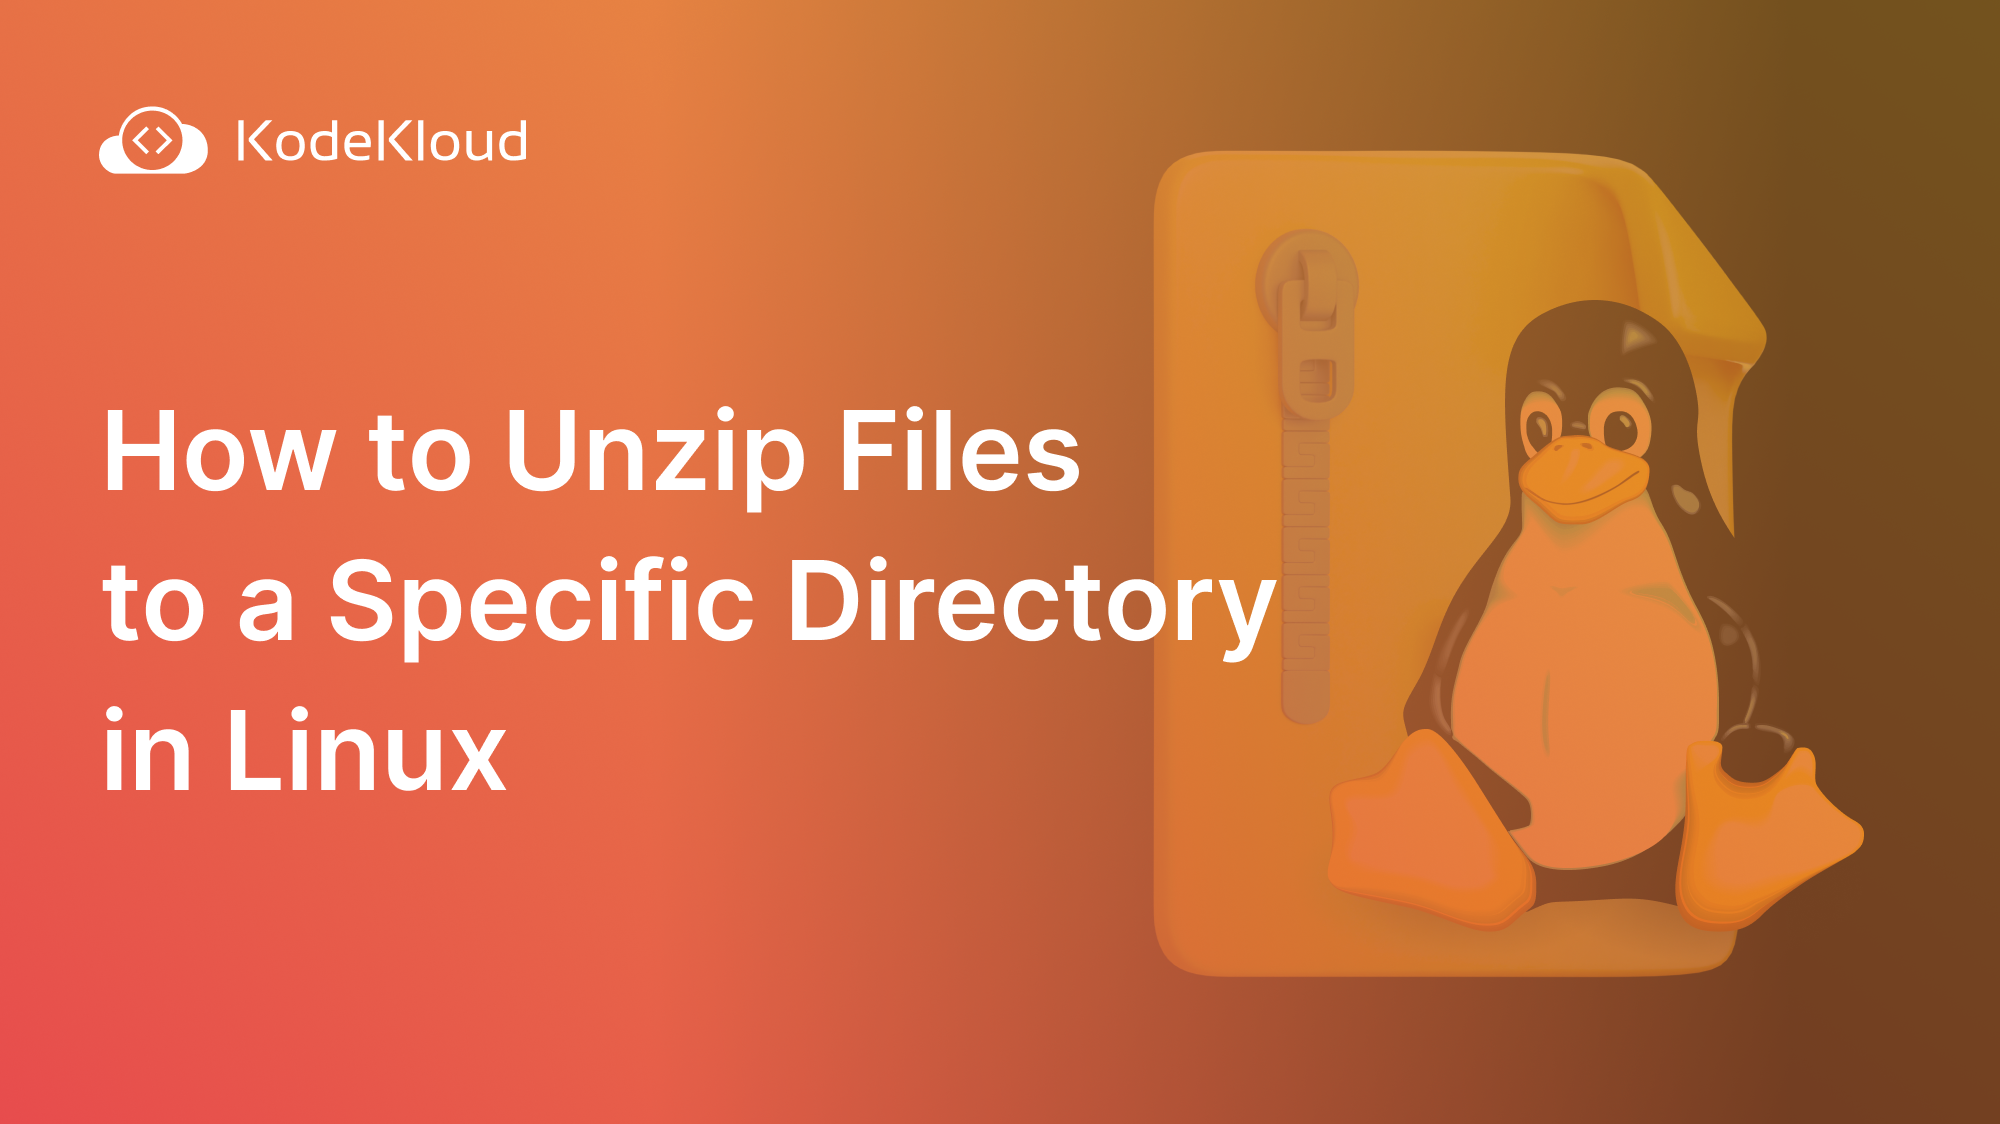 How to Unzip Files to a Specific Directory in Linux